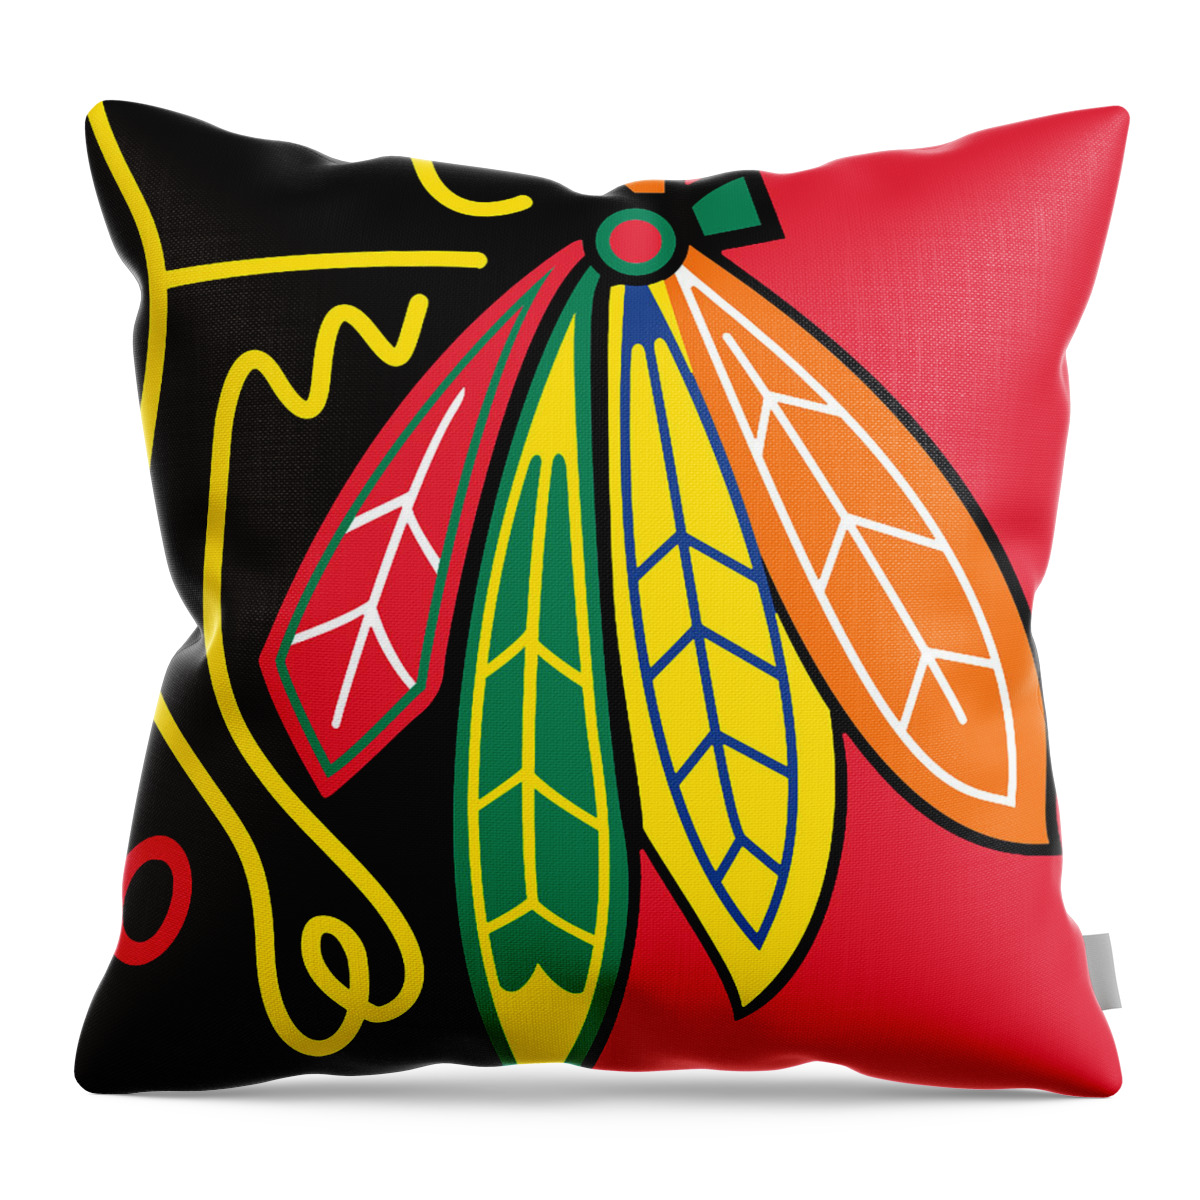 Chicago Throw Pillow featuring the painting Chicago Blackhawks by Tony Rubino